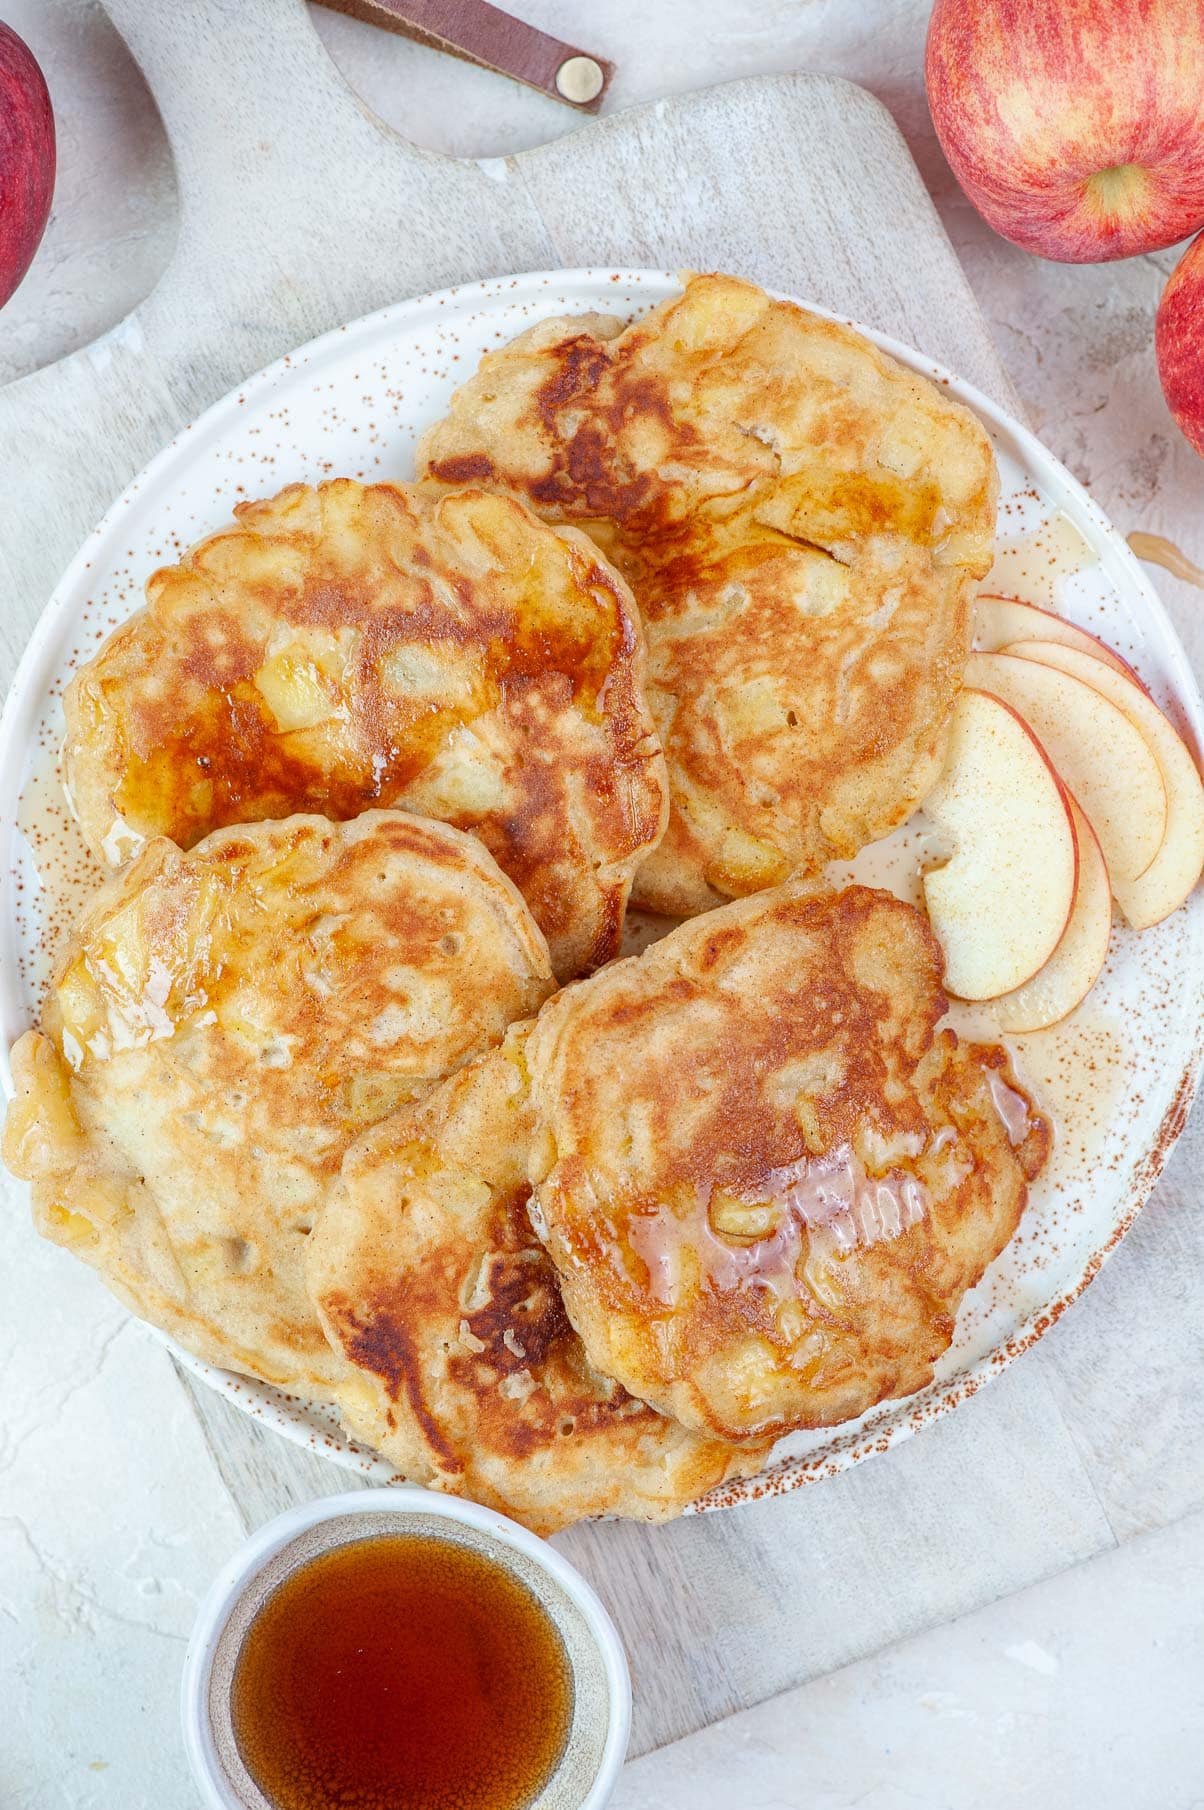 Apple cinnamon pancakes on a white table drizzled with maple syrup.